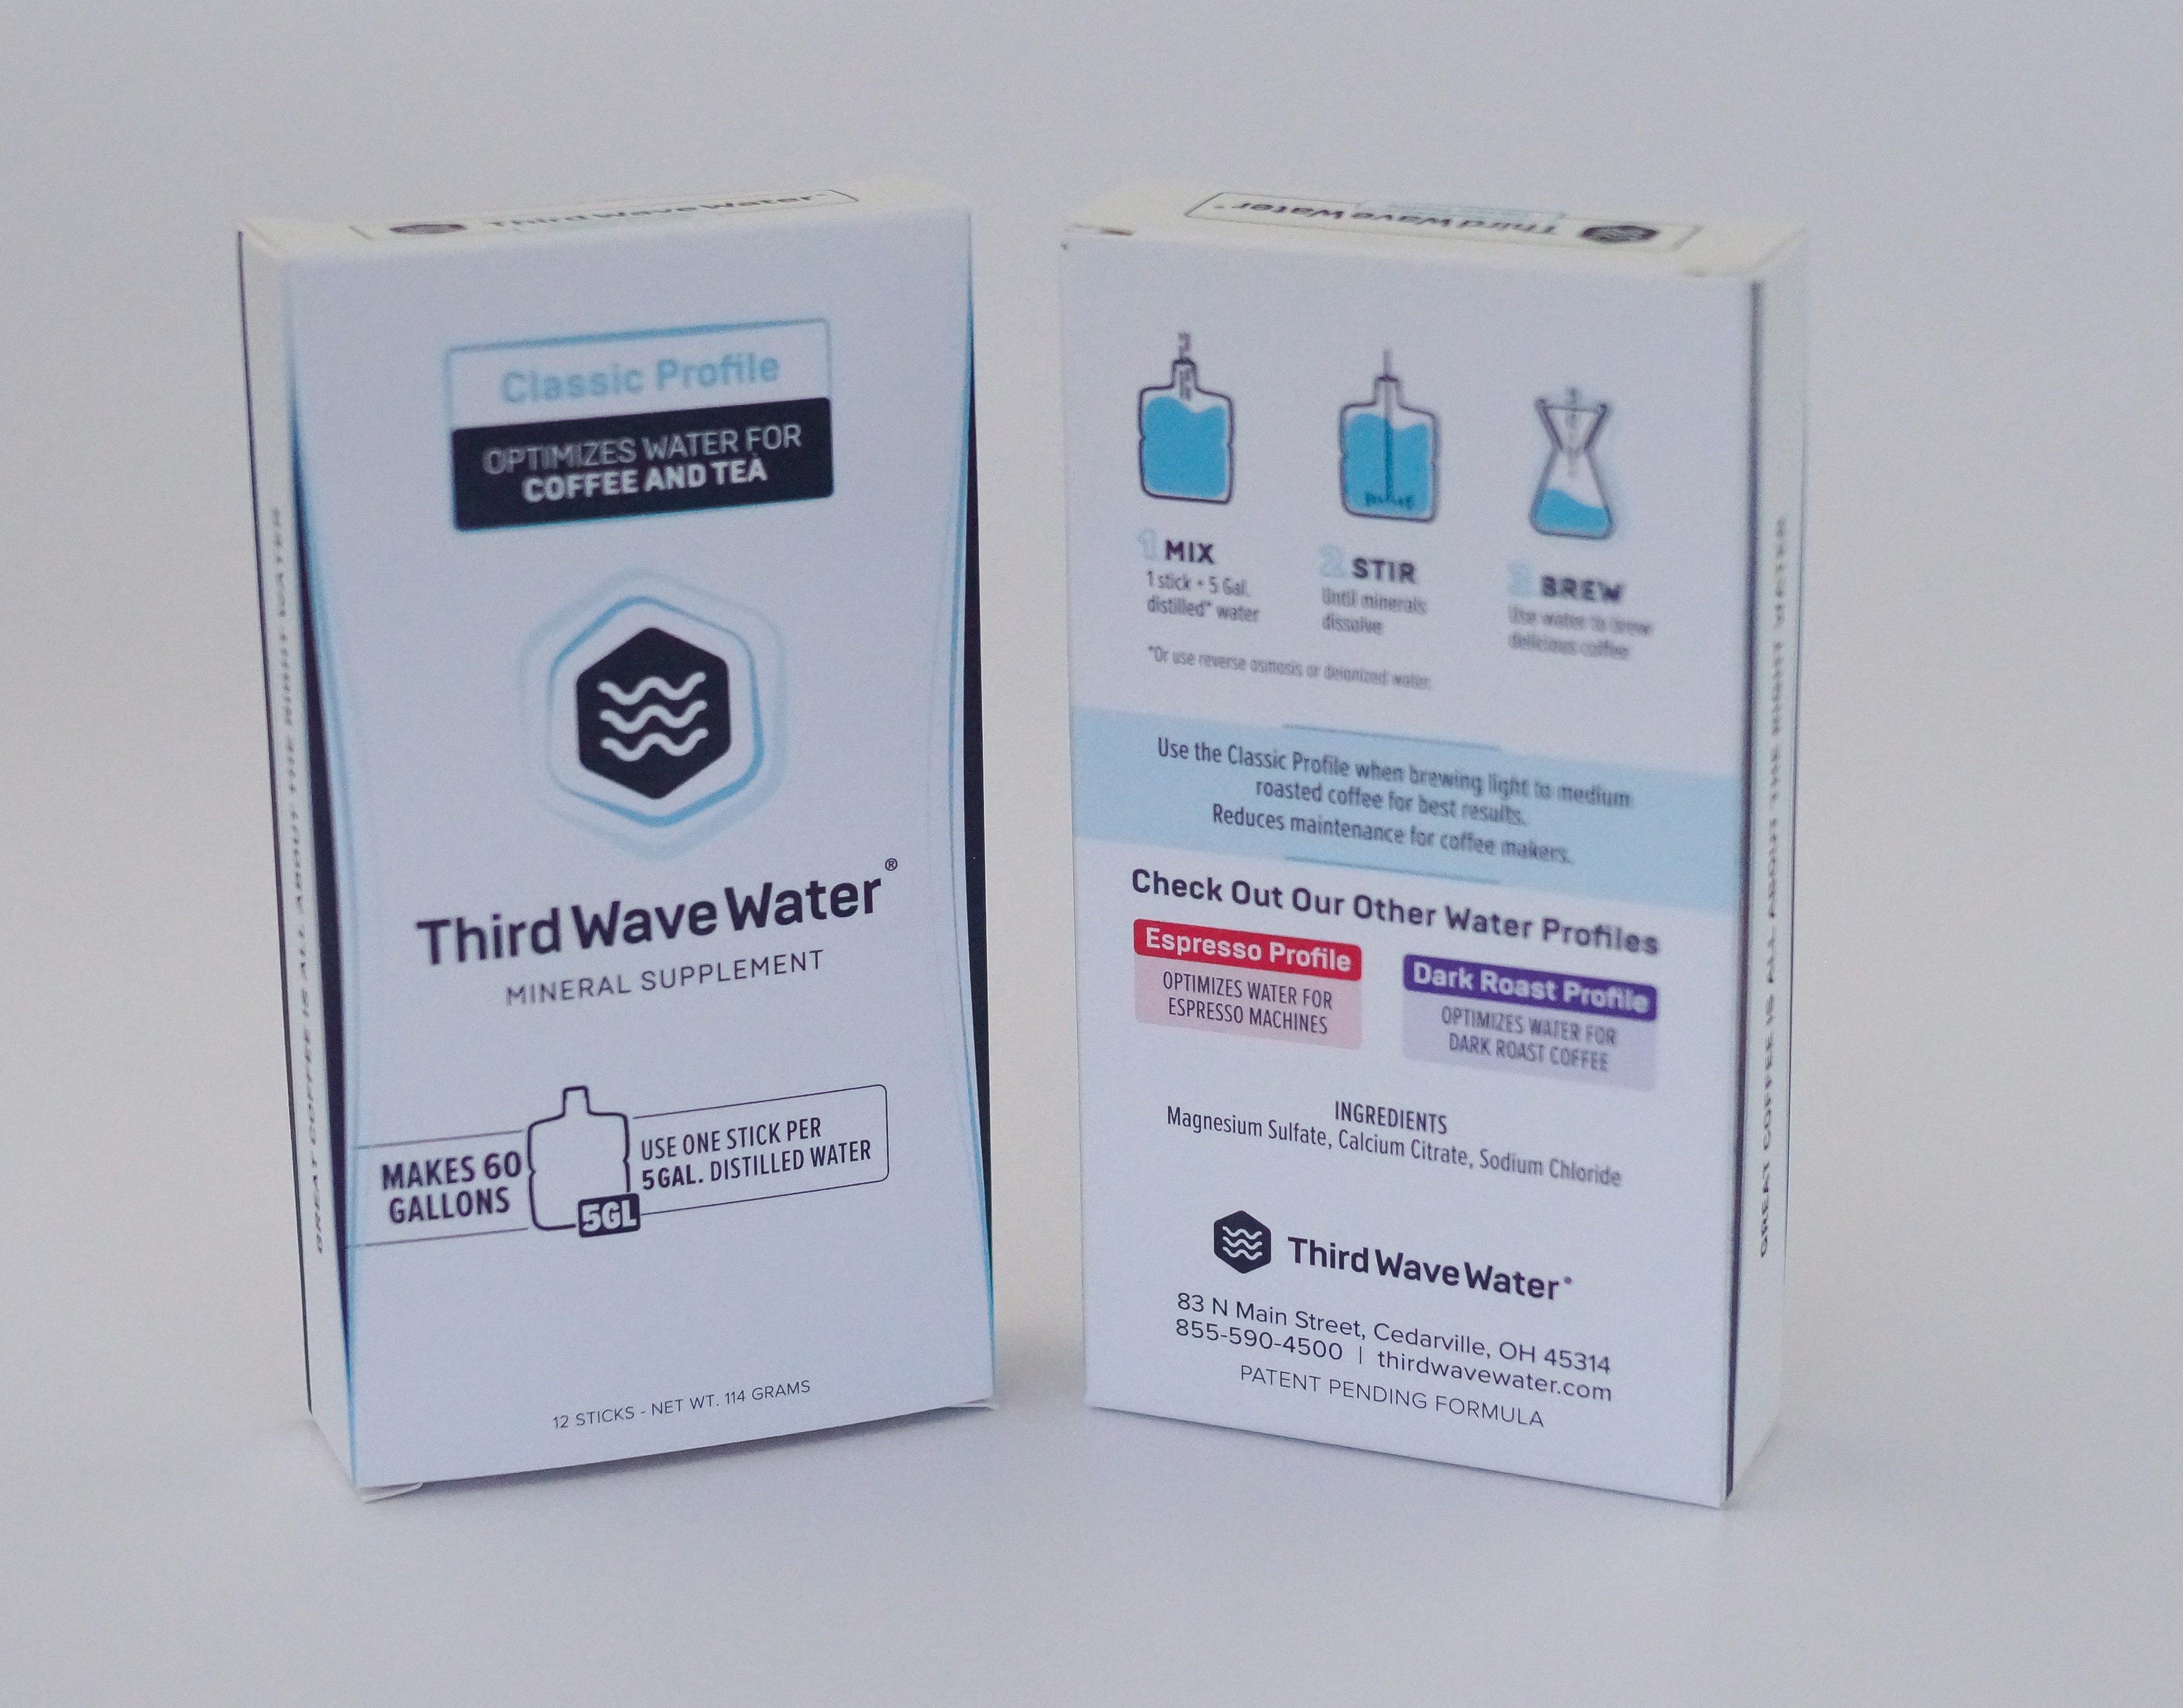 Third Wave Water 5 GALLON - CLASSIC PROFILE 12 - PACKS